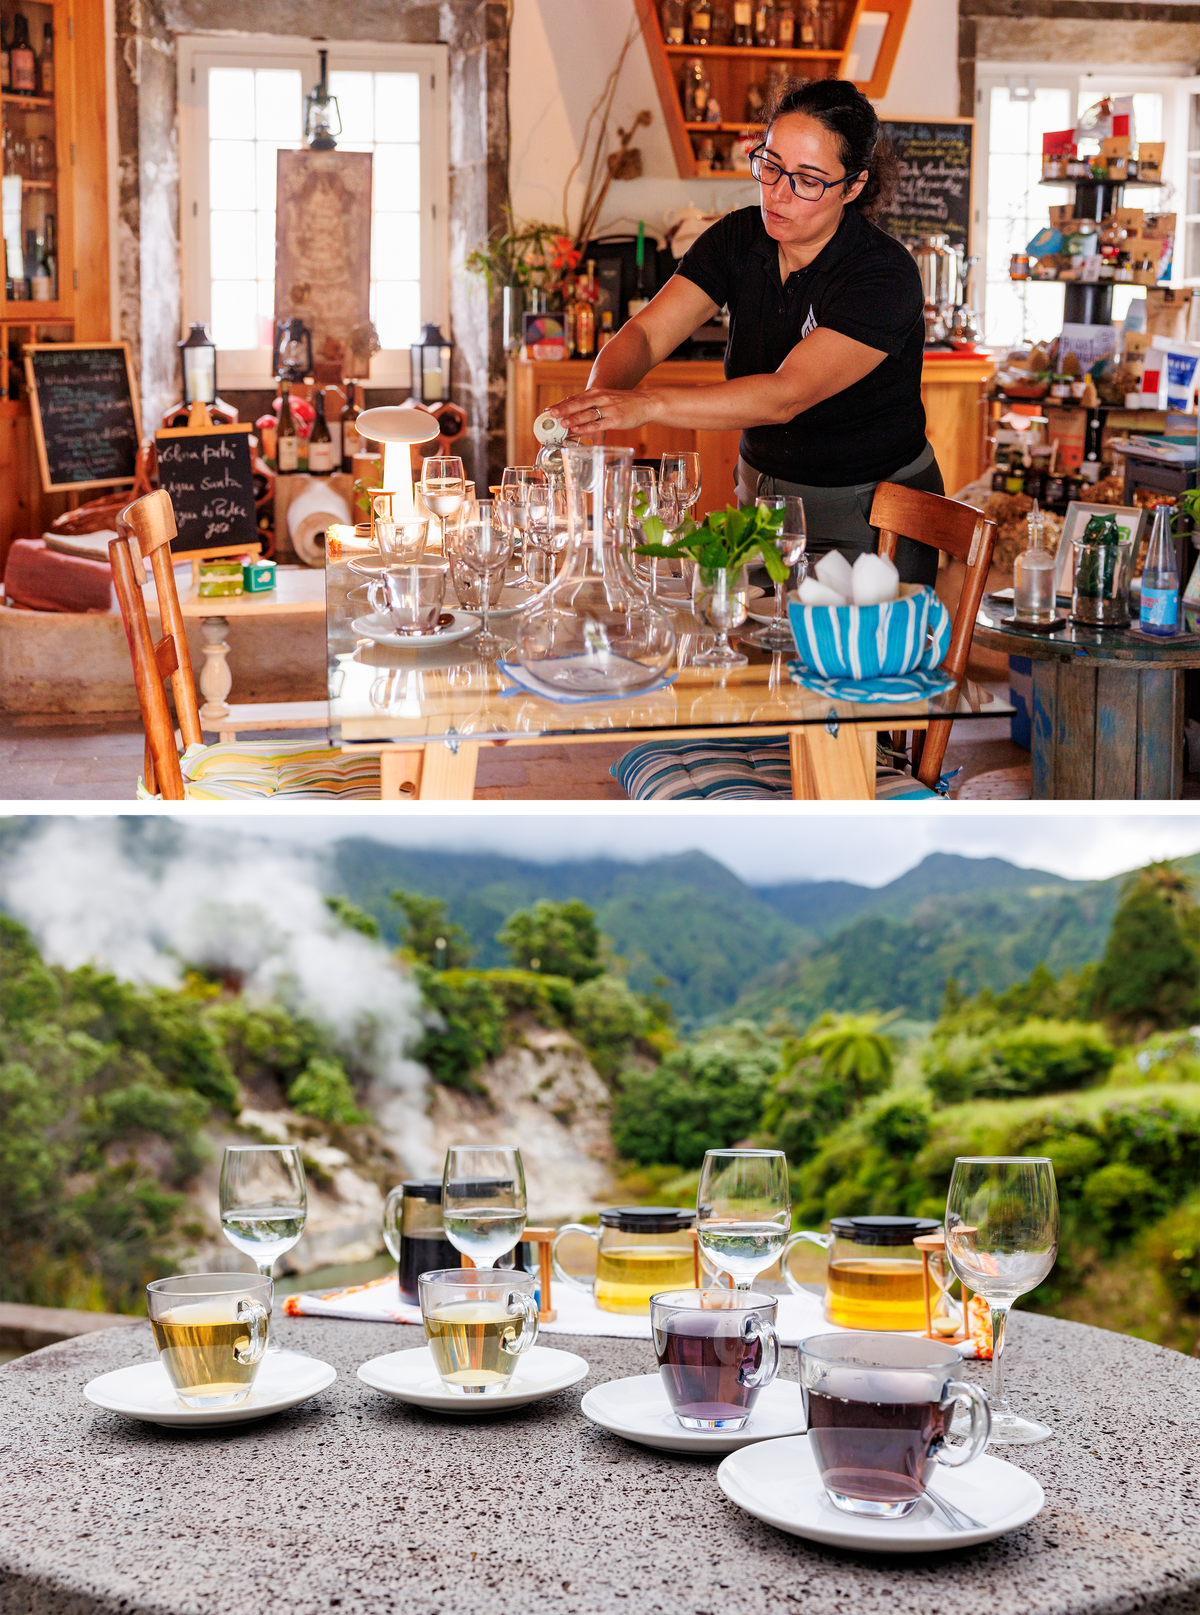 Preparing the tea experience (top) and serving the tea on the outdoor patio at Chalet da Tia Mercês (bottom).